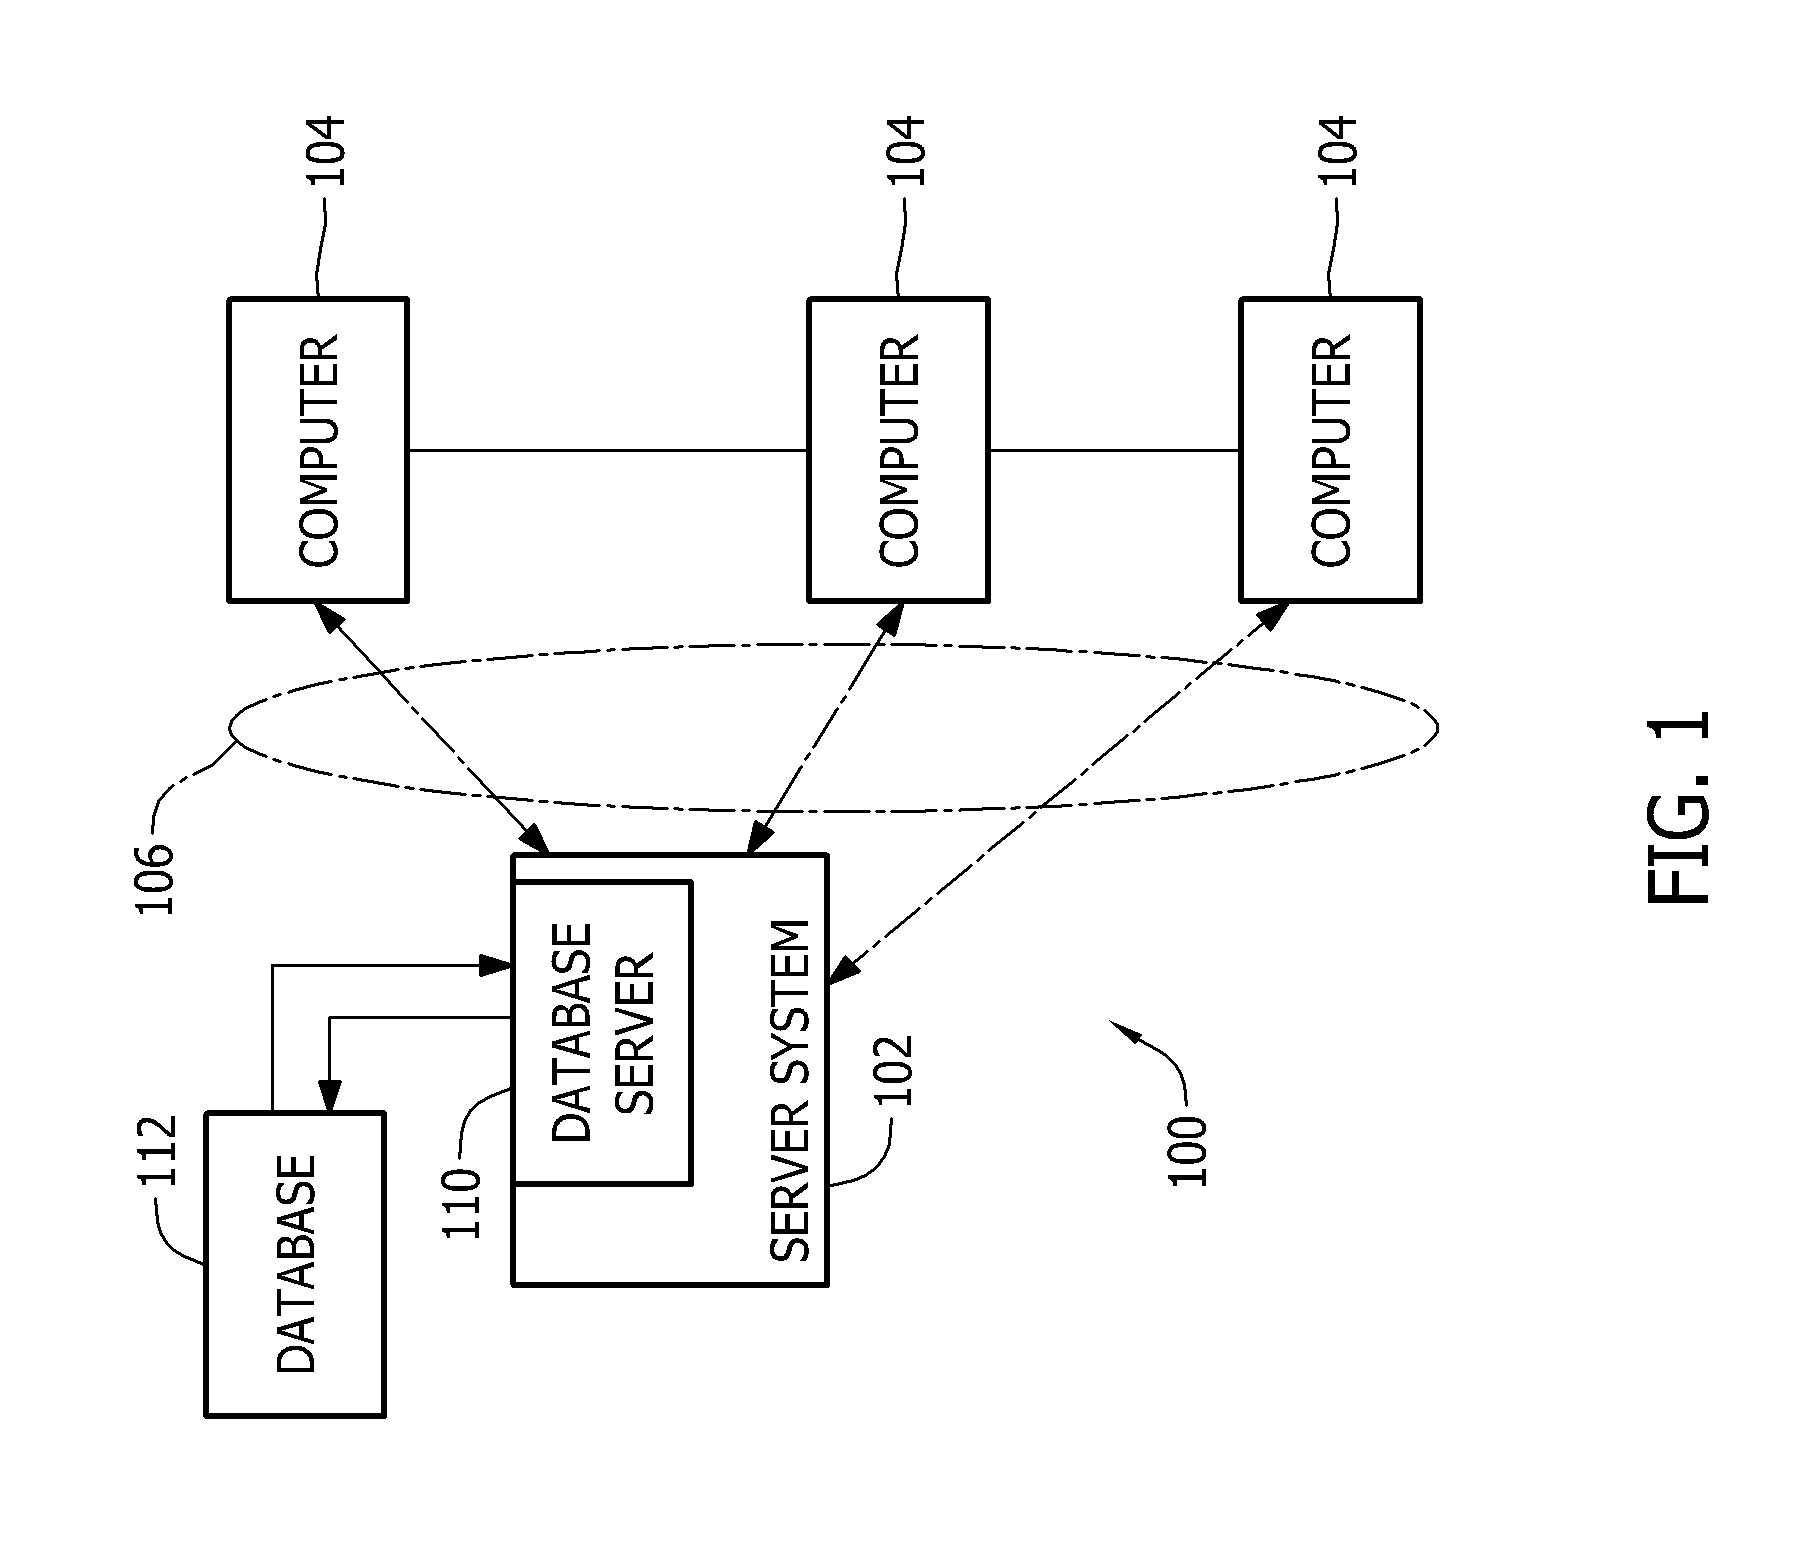 System and method for use in monitoring machines